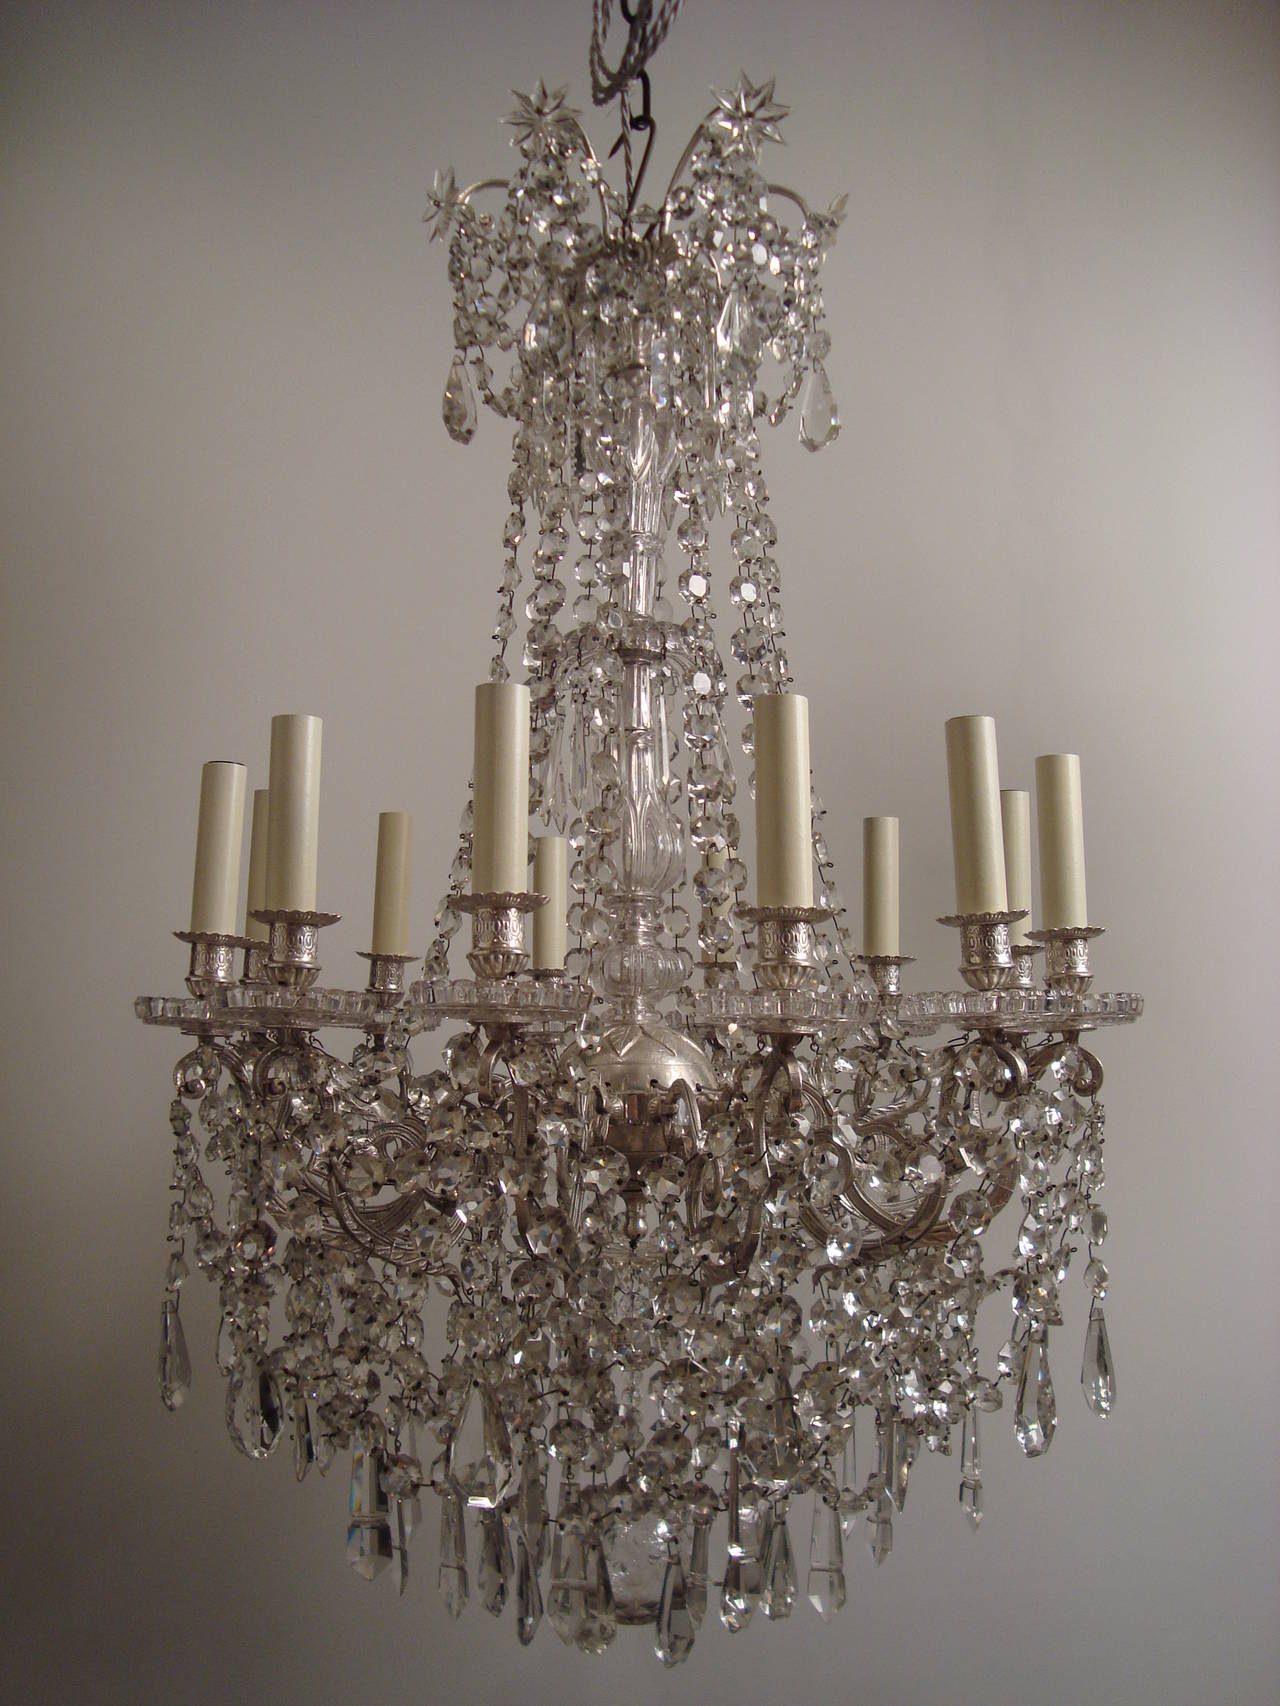 A most attractive silvered bronze, glass and crystal chandelier,  attributed to Baccarat. Of very well know model by Baccarat of the Belle Epoque, the silvered bronze central ball inspired from the Empire period and projecting 14 arms of light, each